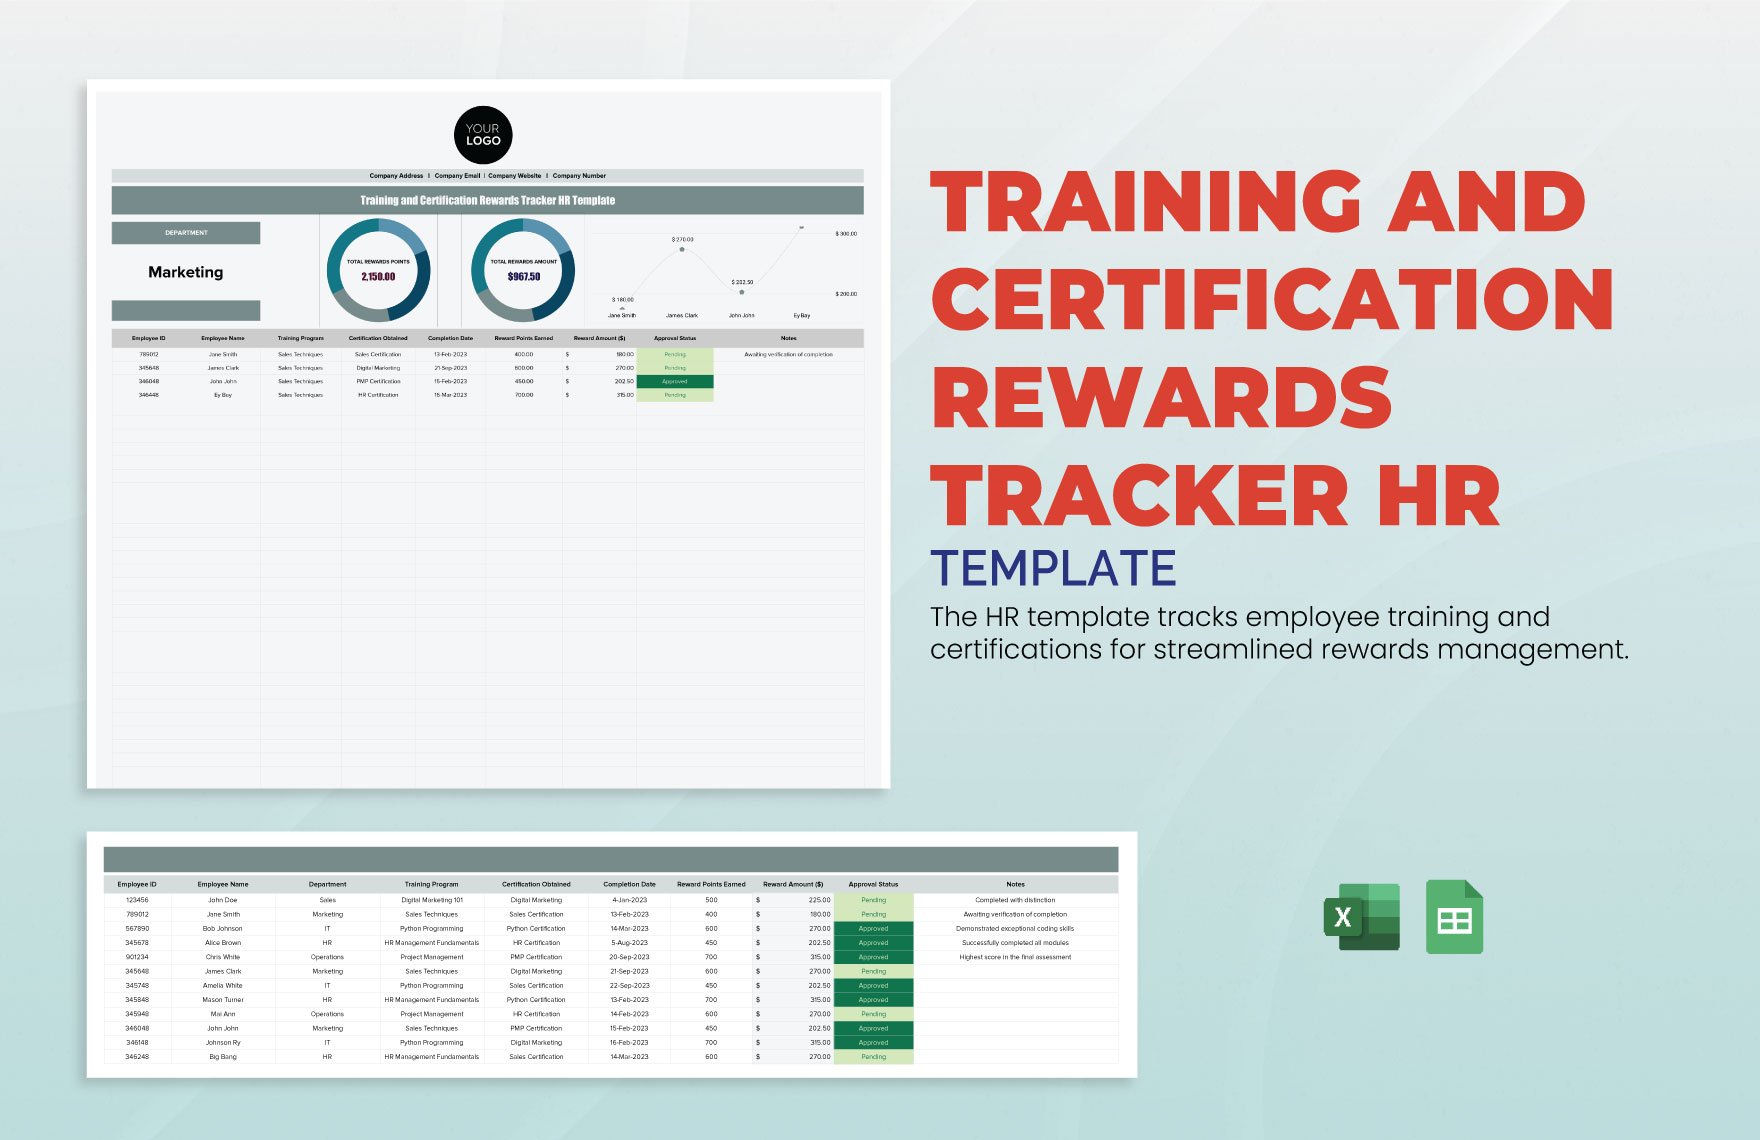 Training and Certification Rewards Tracker HR Template